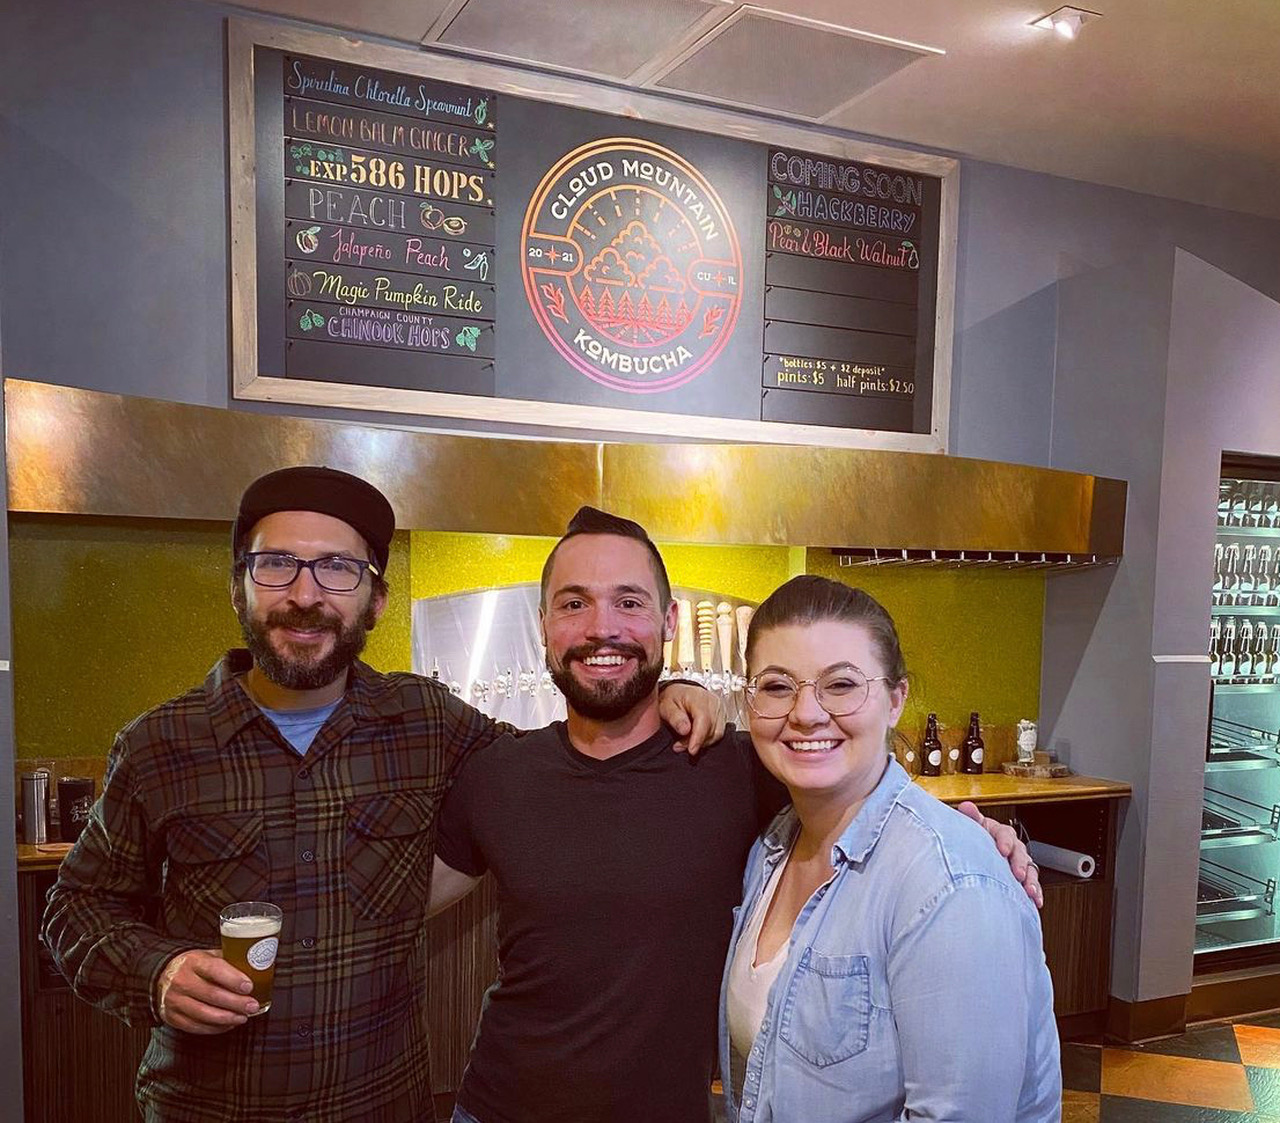 In front of the kombucha taps, there are three owners, all white. On the left is a bearded man in glasses and a hat holding a pint glass full of kombucha with his other arm around the bearded man in the middle who has his arm around a female. All three are smiling to the camera. Photo from Cloud Mountain Kombucha's Instagram page.